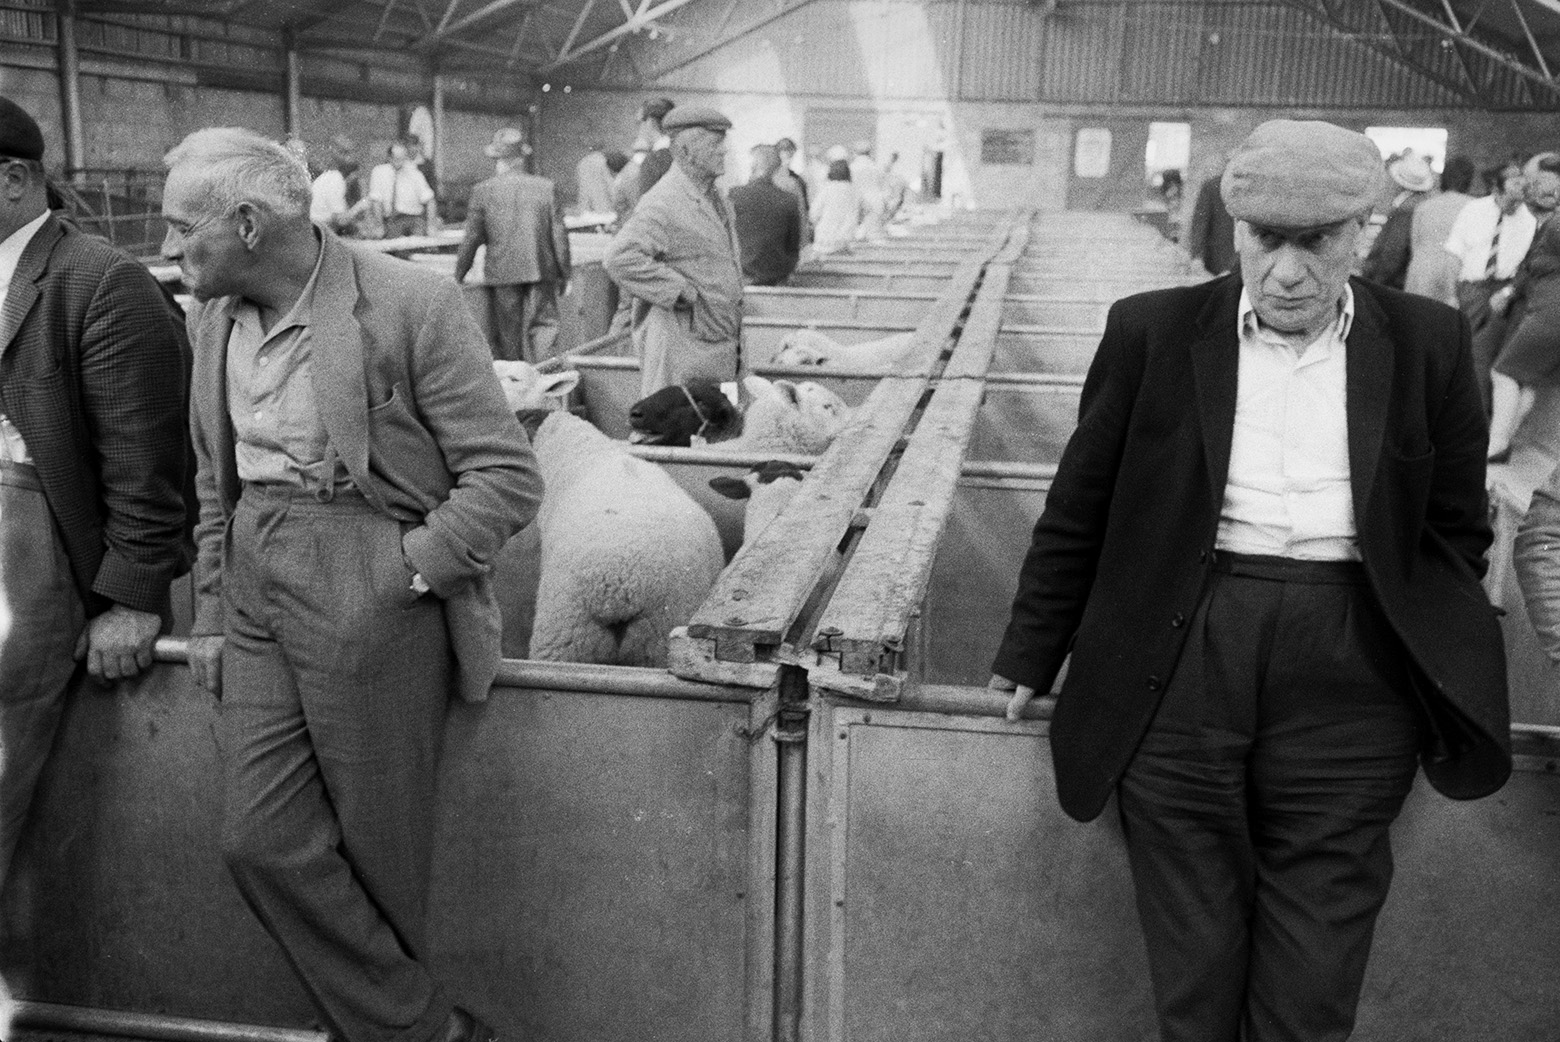 Men leaning against sheep pens at Hatherleigh Market.